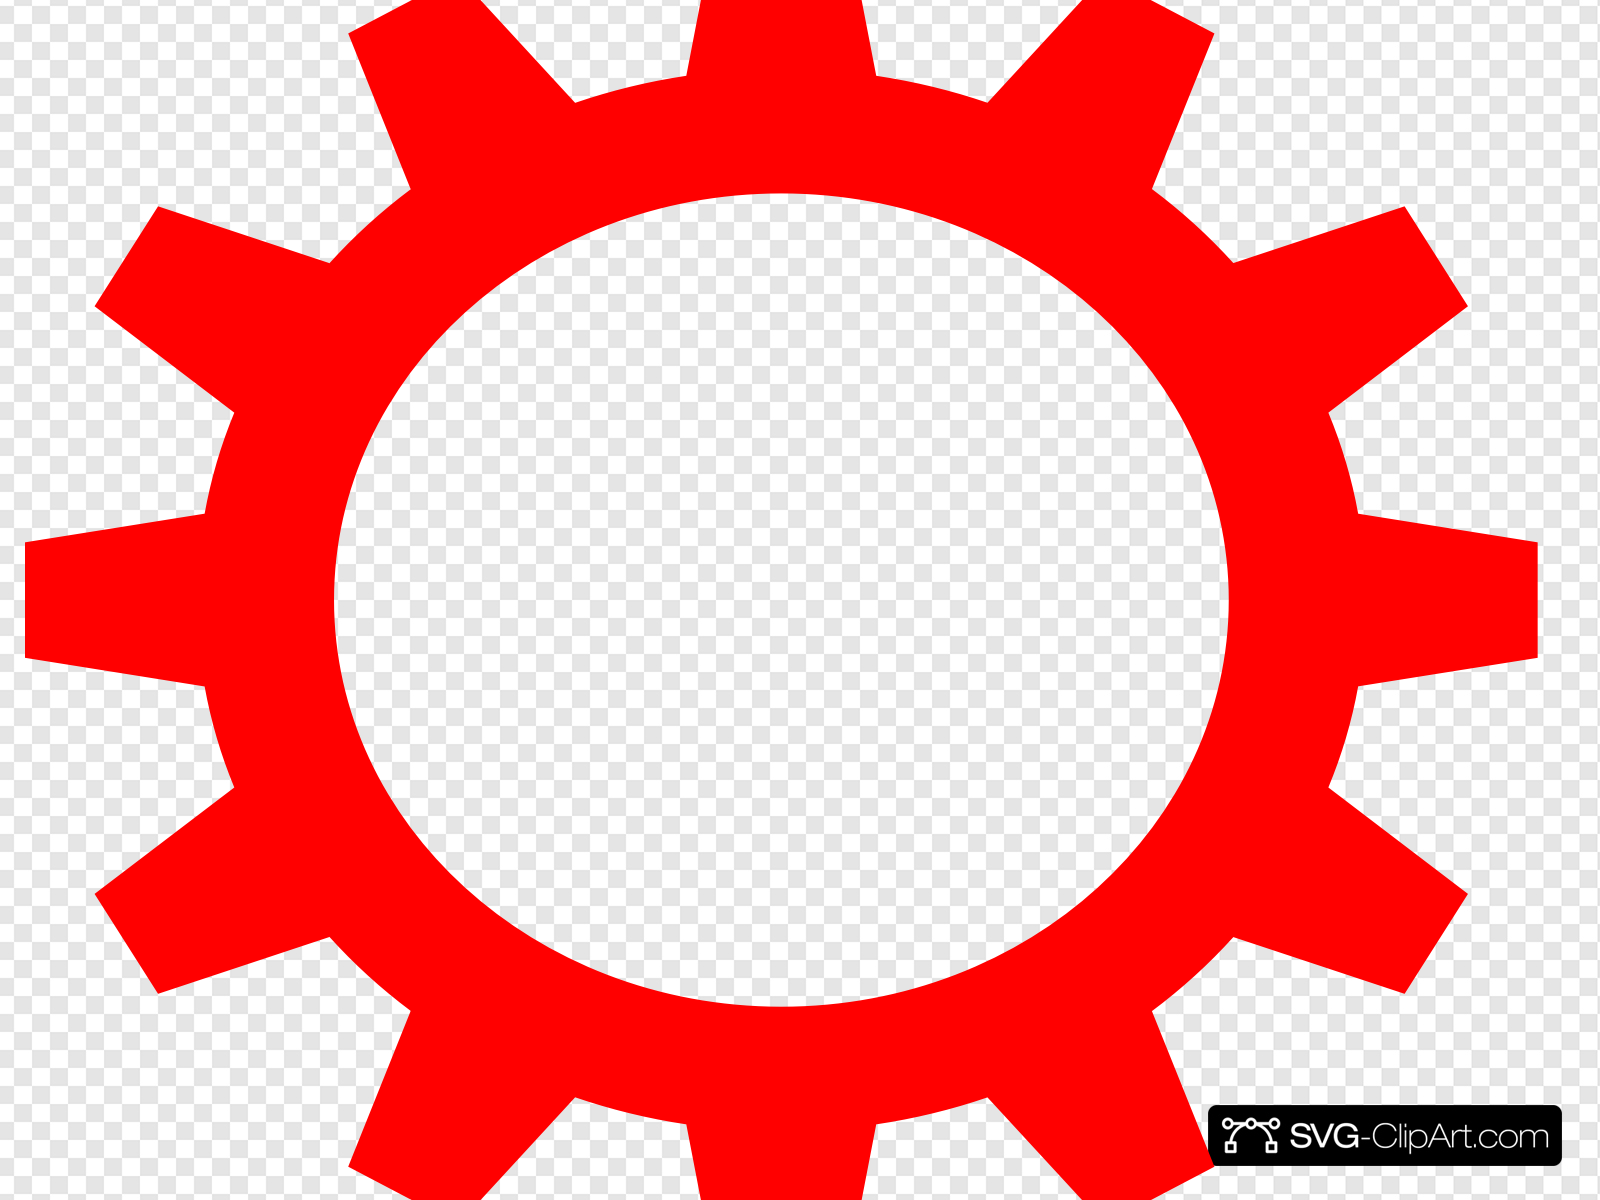 Gear clipart high resolution. Red clip art icon